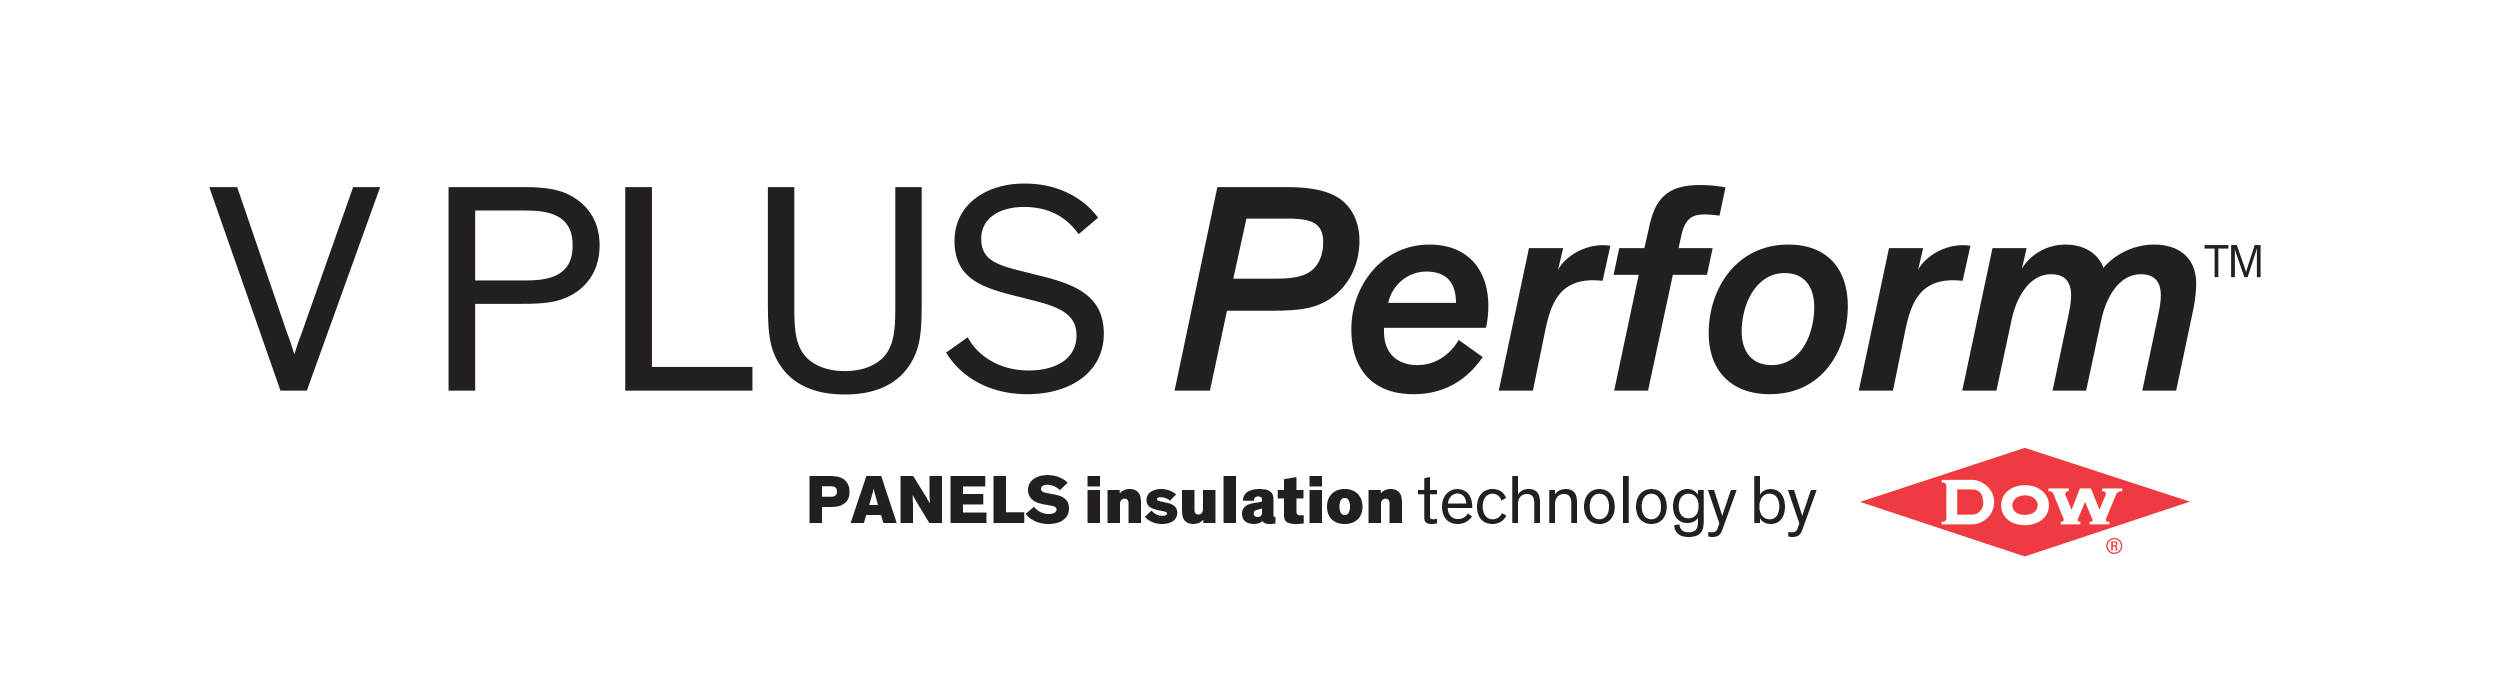 V PLUS Perform: PANELS insulation technology by Dow